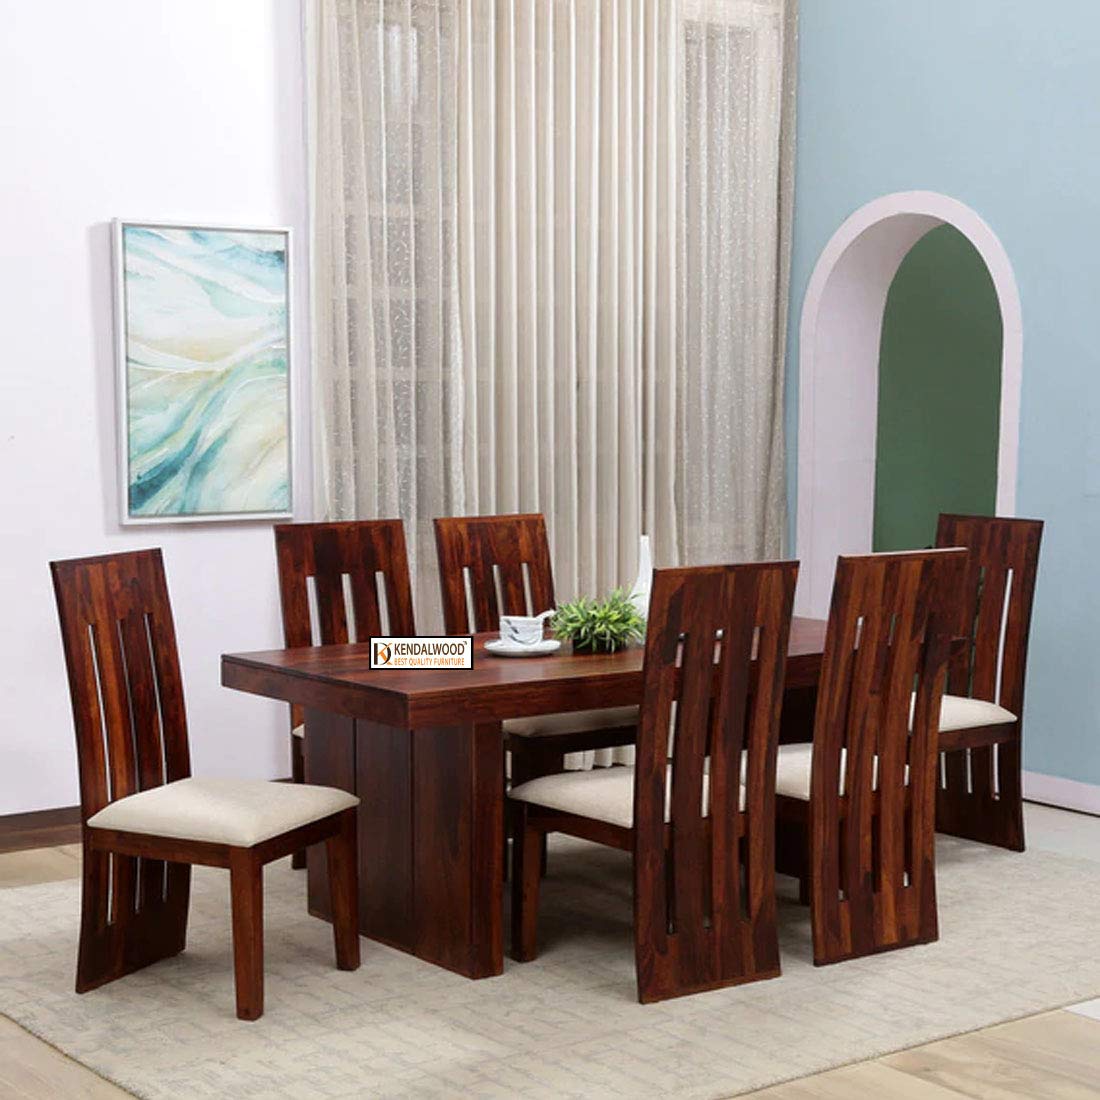 A brown wooden dining table with six brown chairs from Kendalwood Furniture